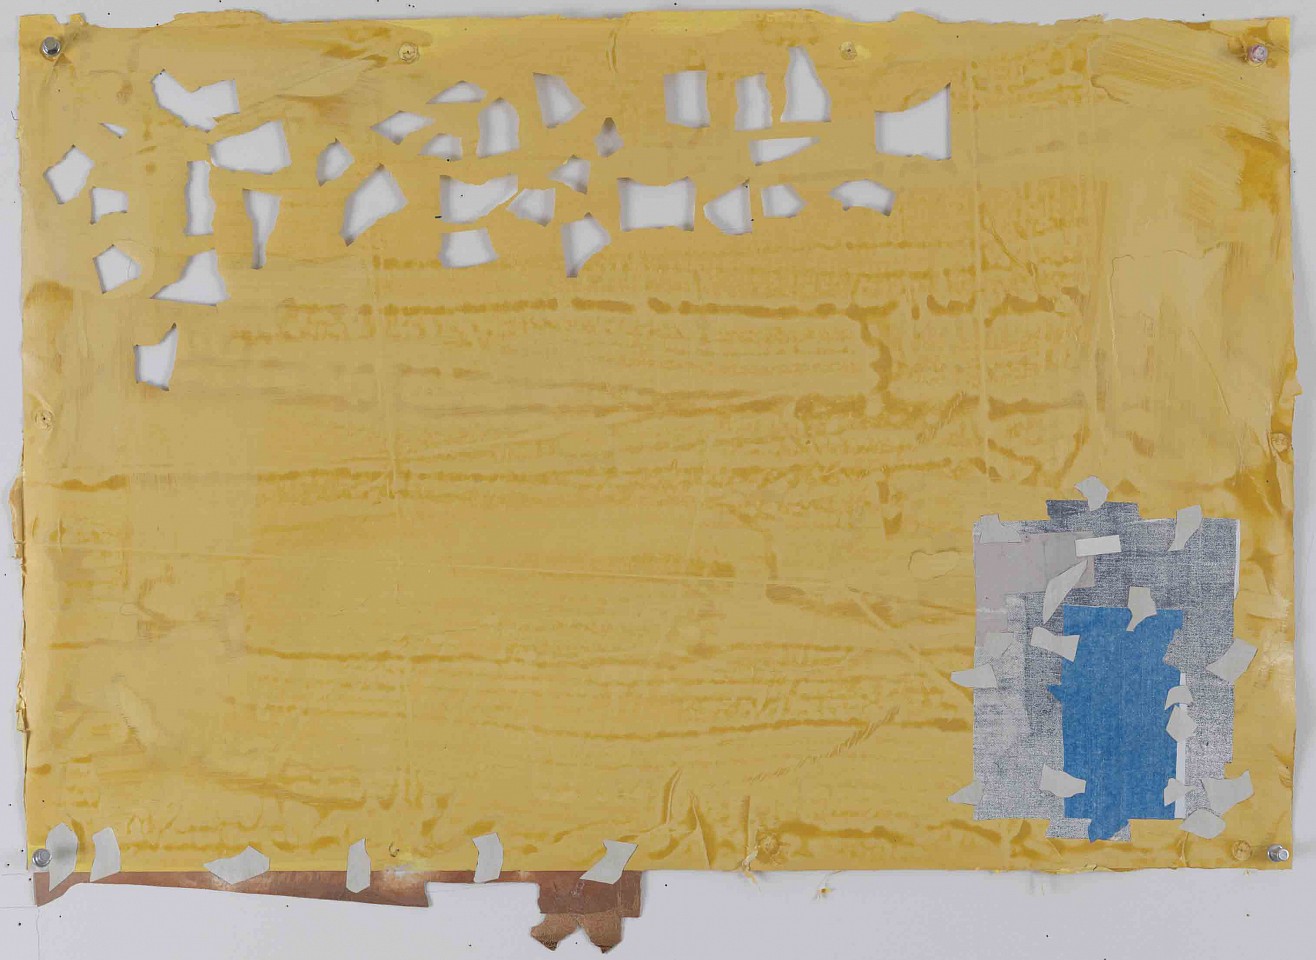 Eugene Brodsky
Yellow with Holes, 2017
BROD344
ink on silk, 32 x 23 inches